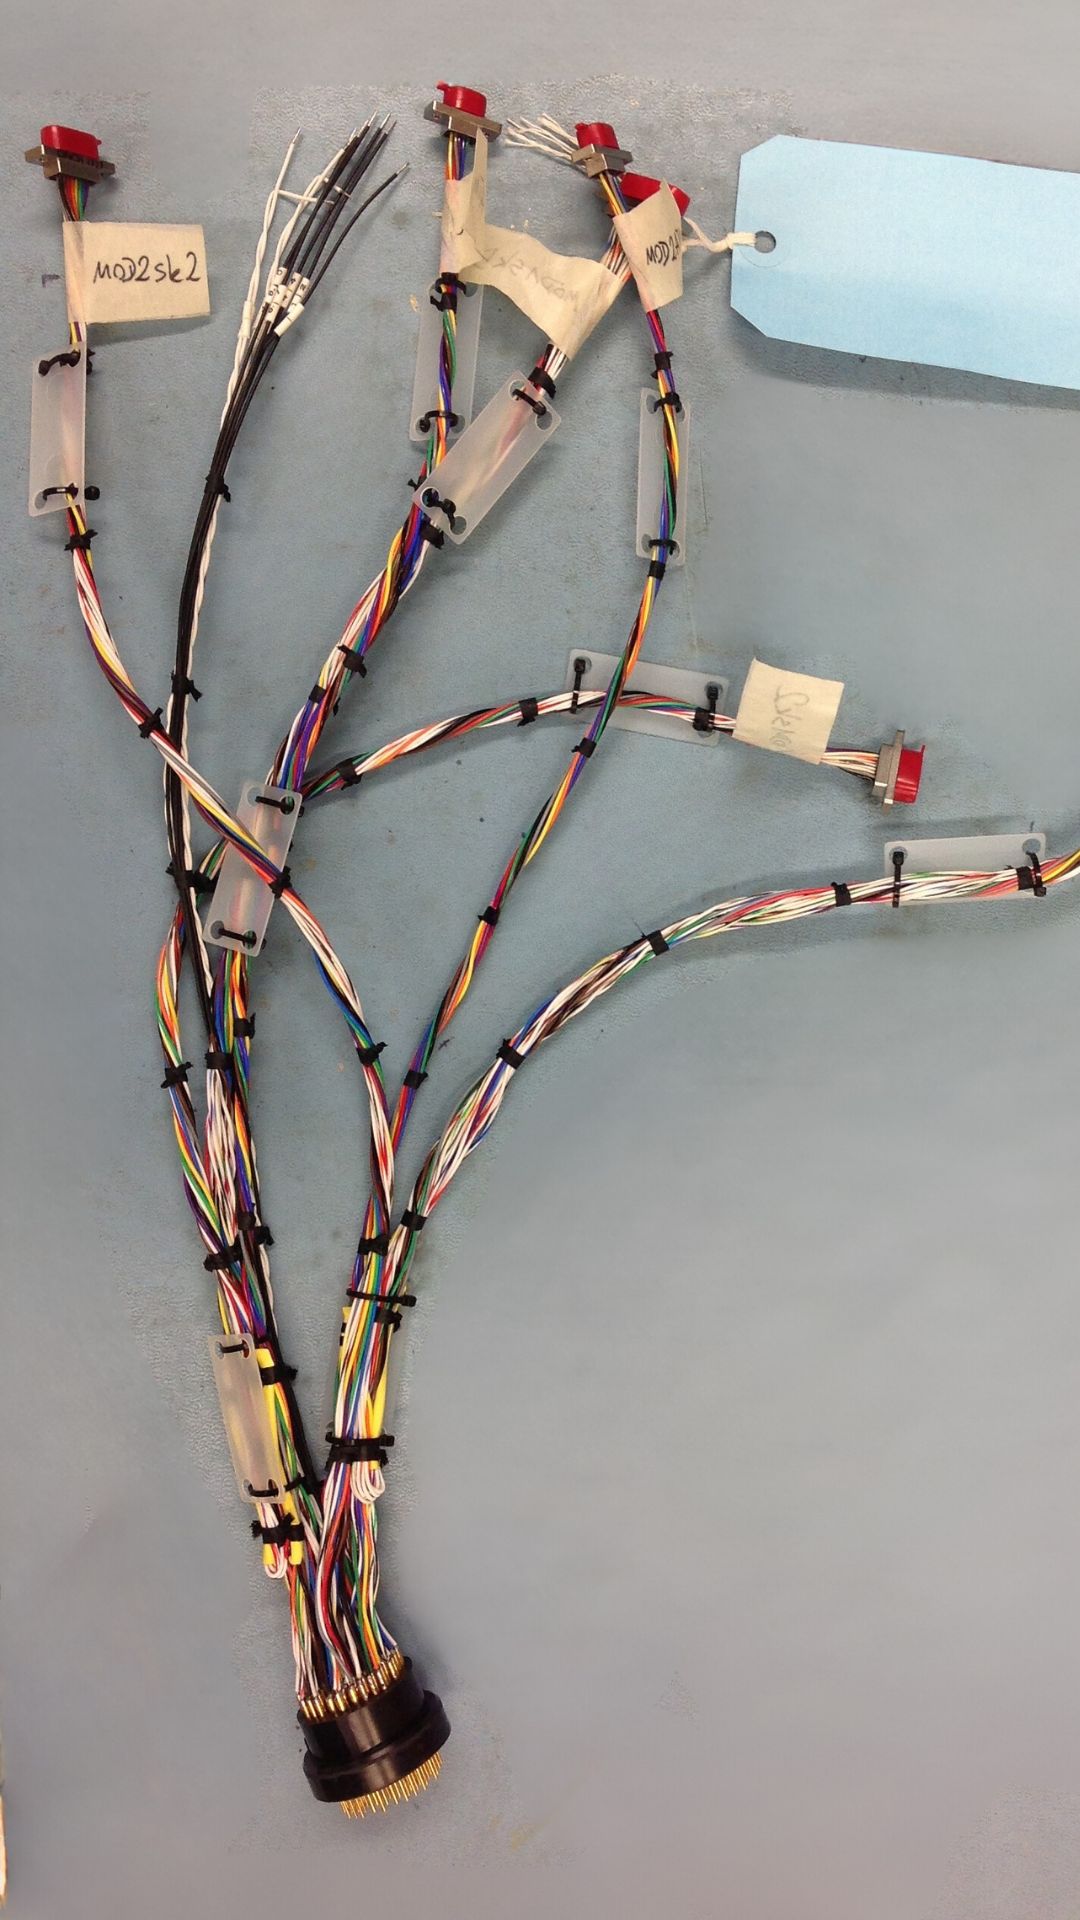 Exceptional Quality Wiring Looms